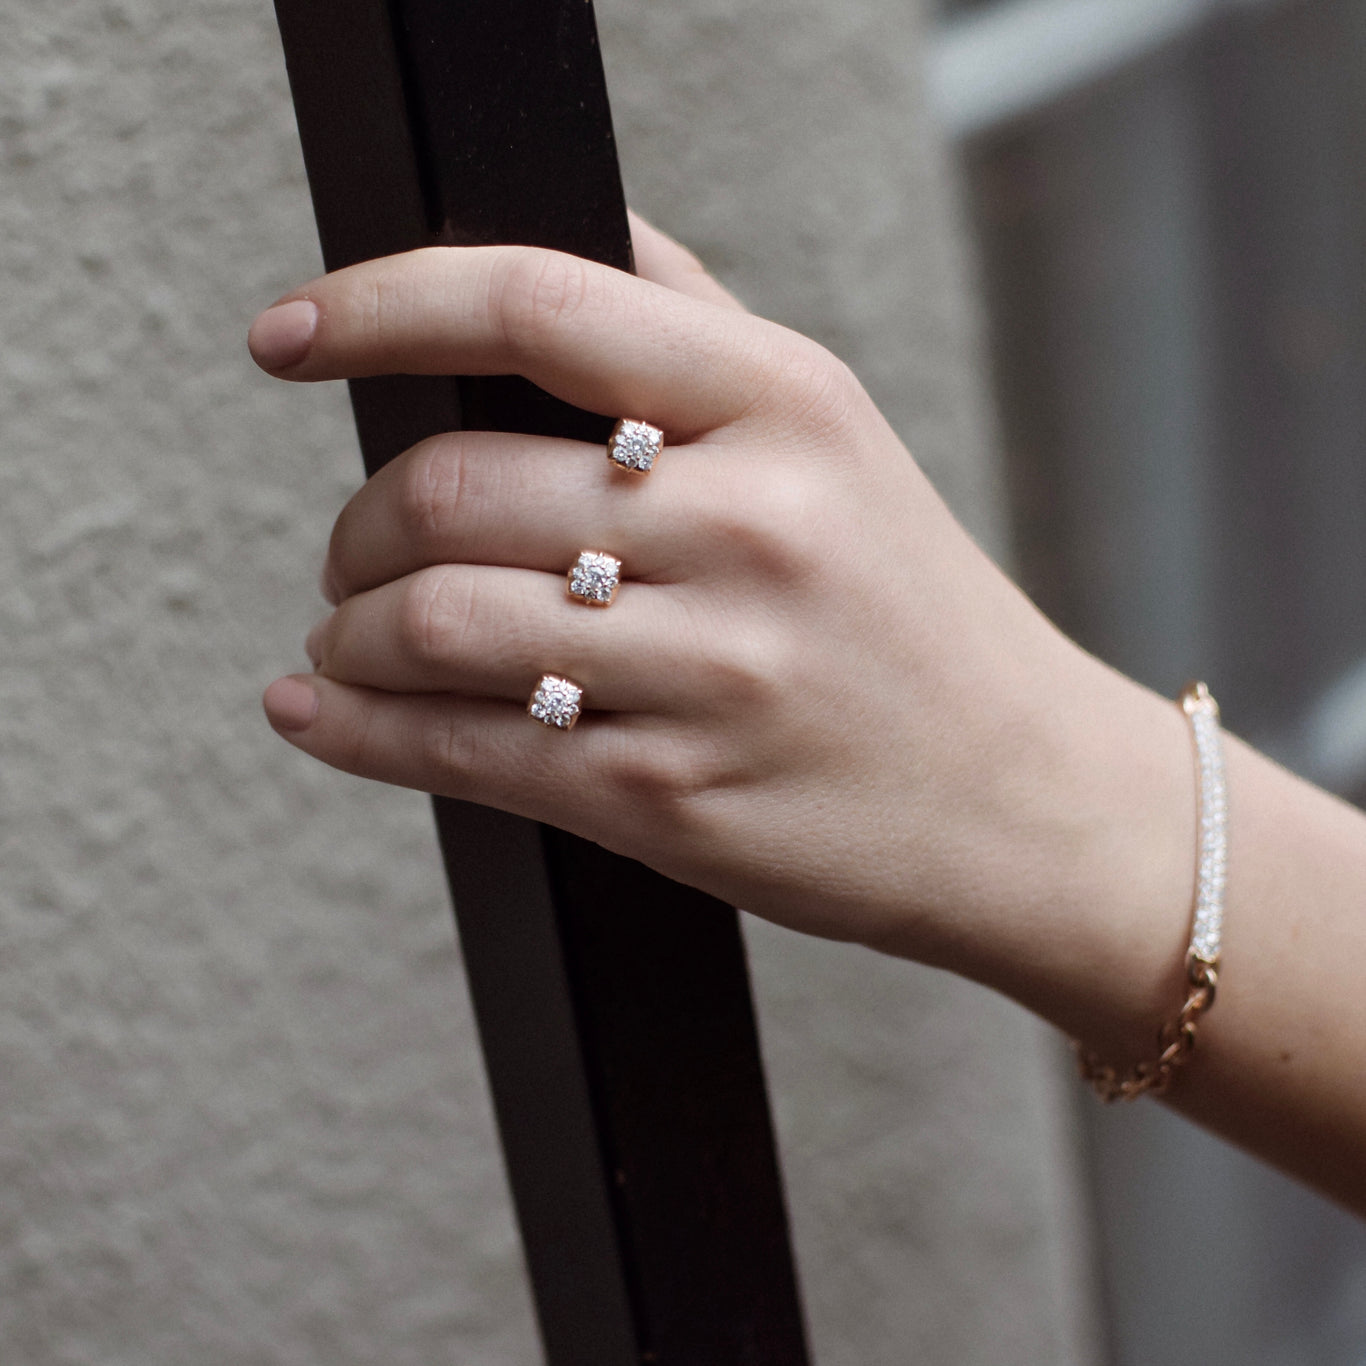 Trilogy Ring shown with the Pantheon Bracelet.